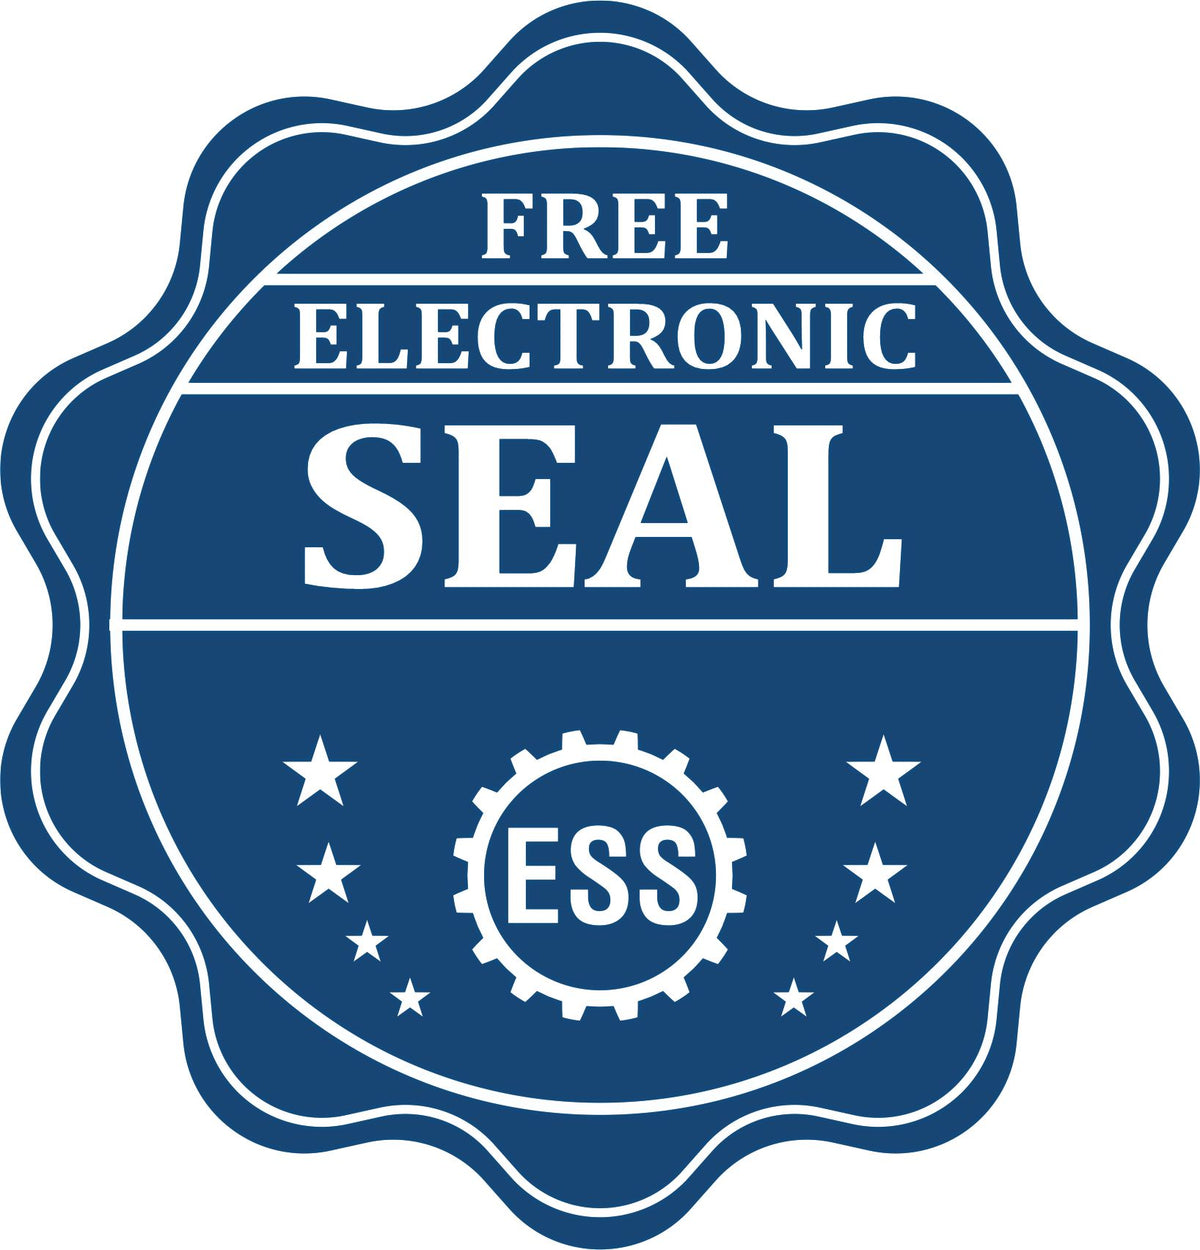 A badge showing a free electronic seal for the Ohio Professional Engineer Seal Stamp with stars and the ESS gear on the emblem.